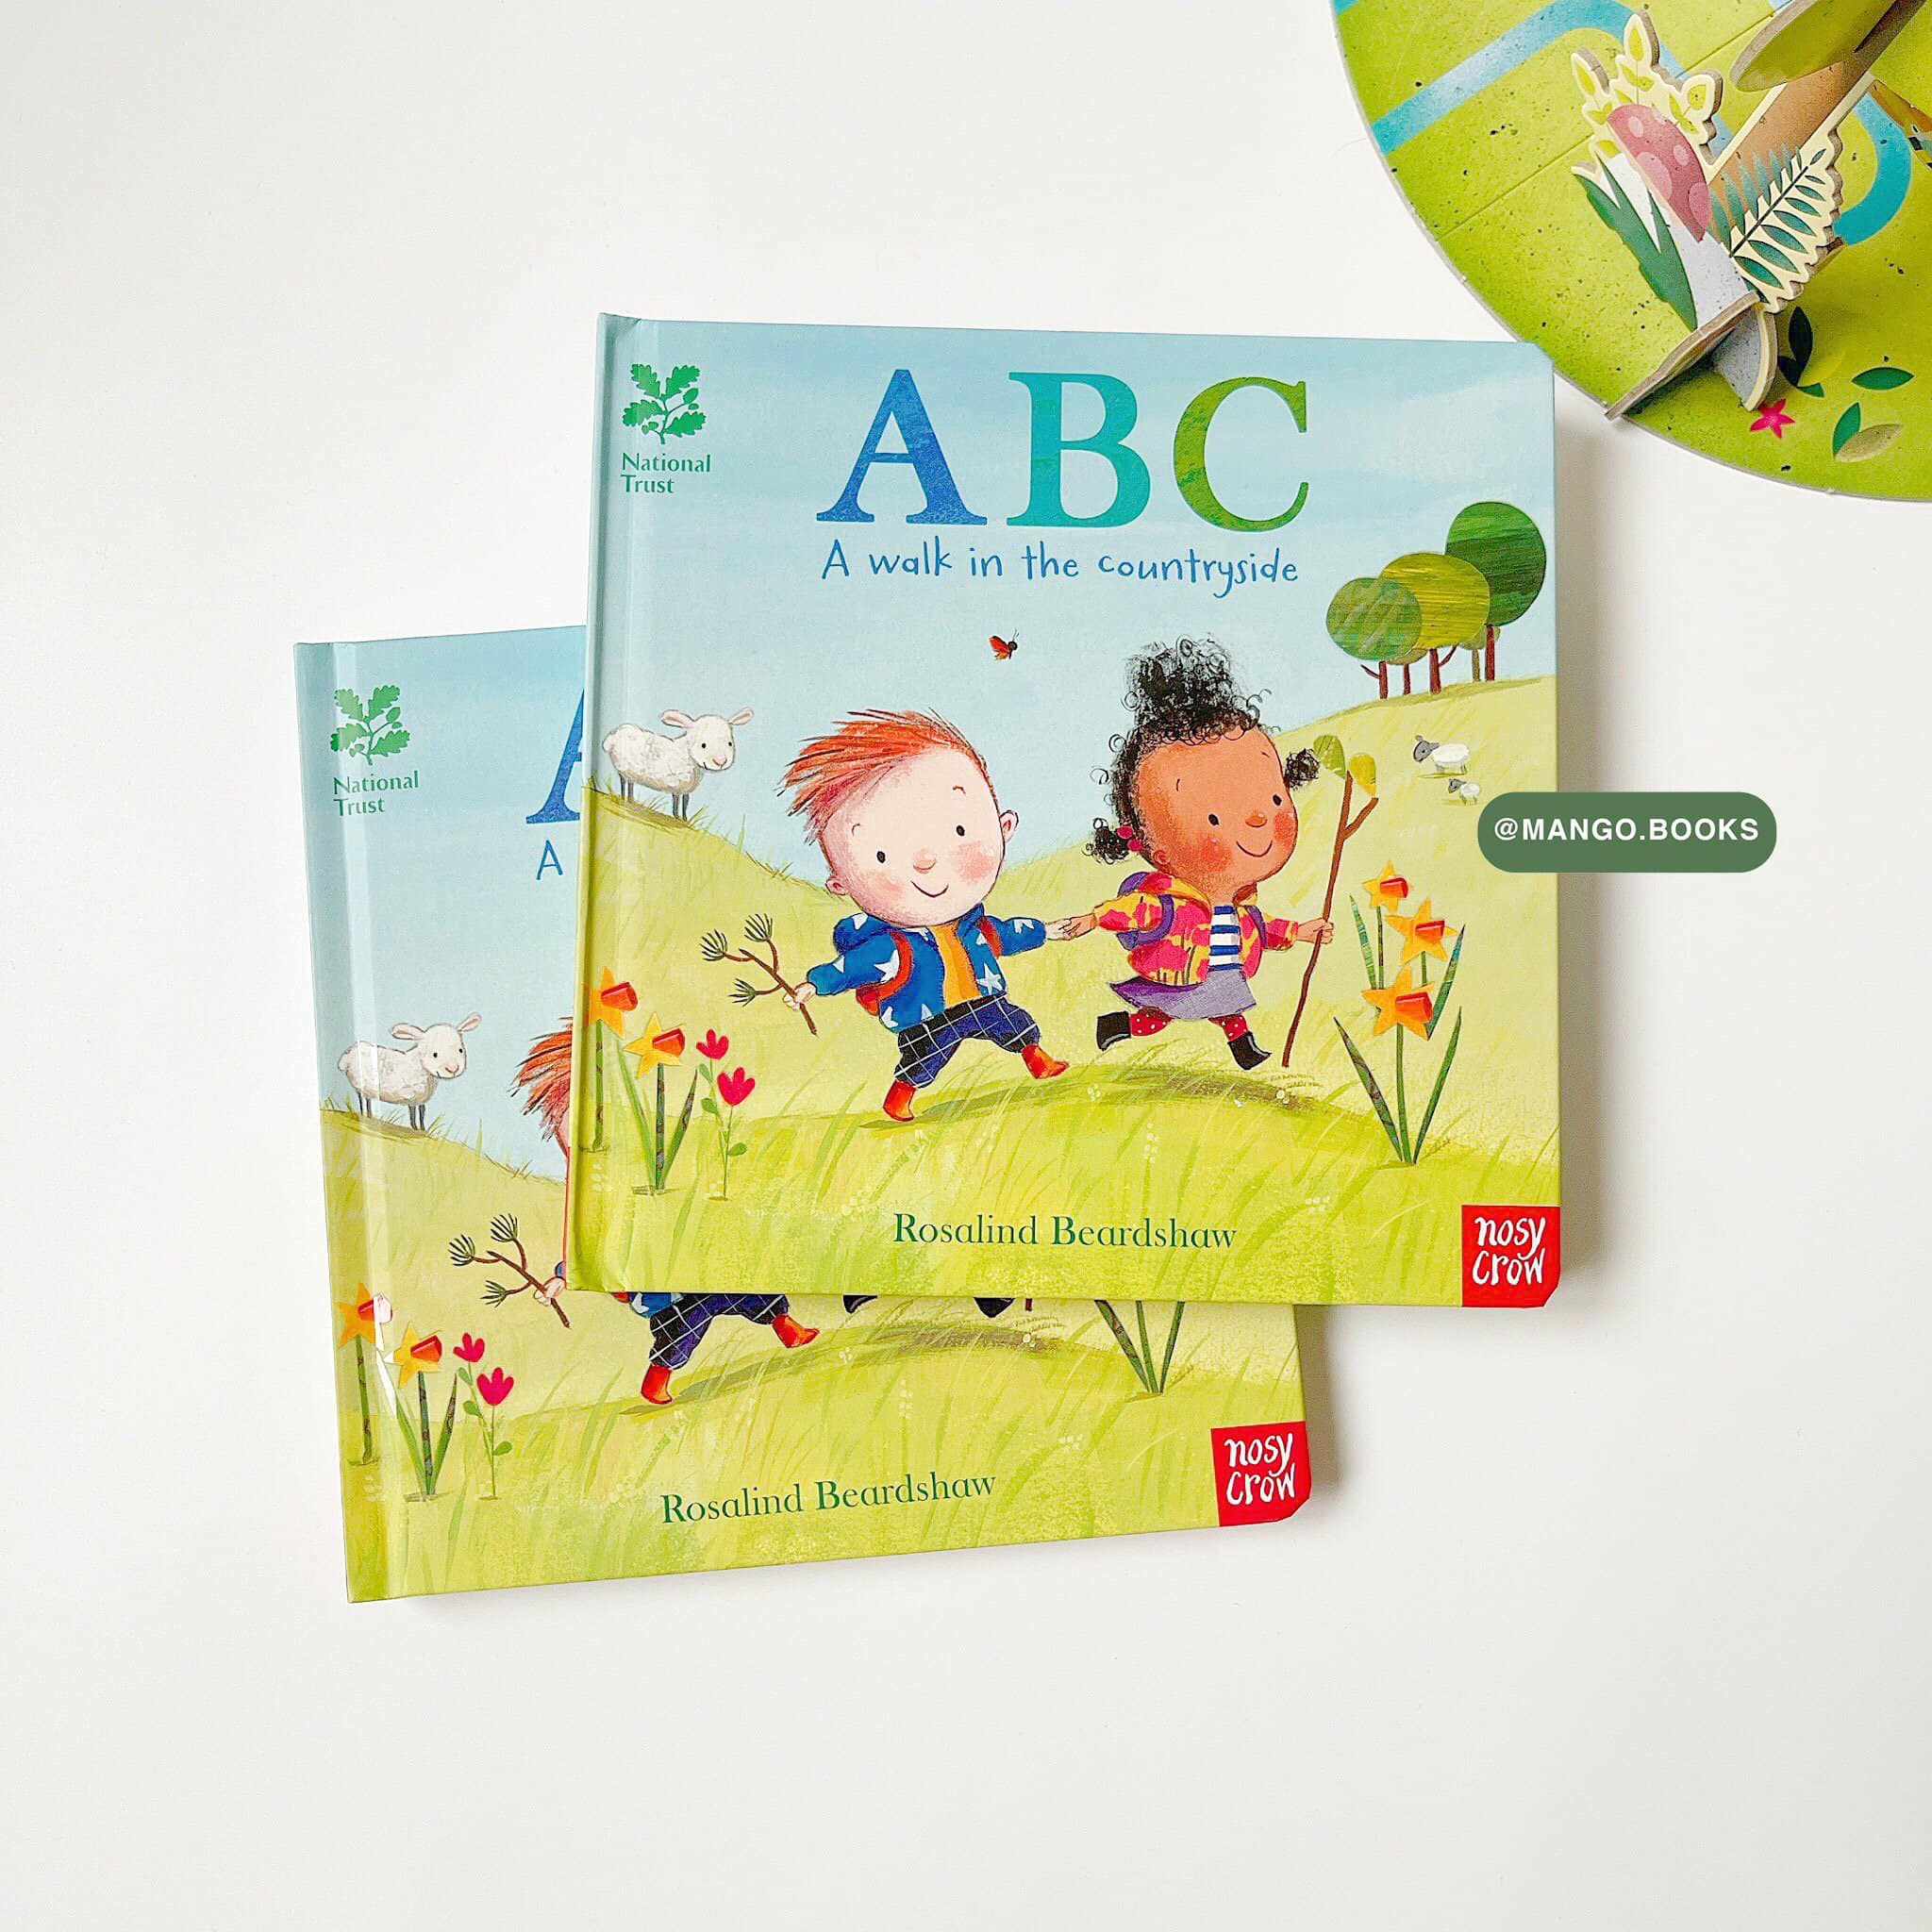 A walk in the Countryside: ABC